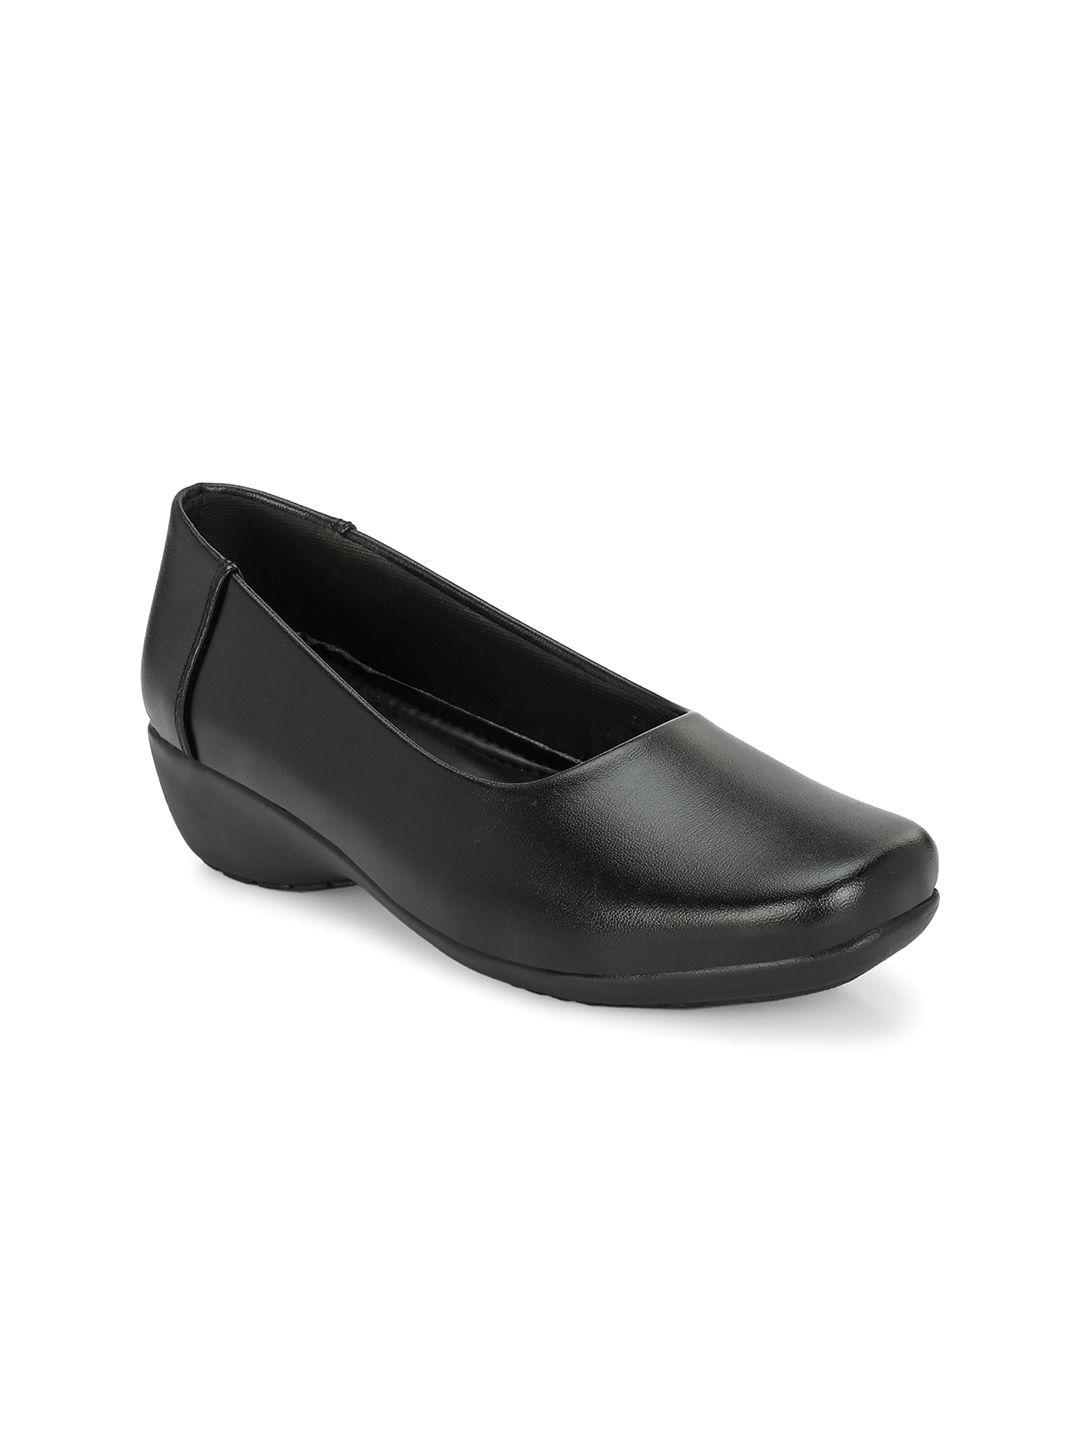 eego italy  round toe work wedge pumps